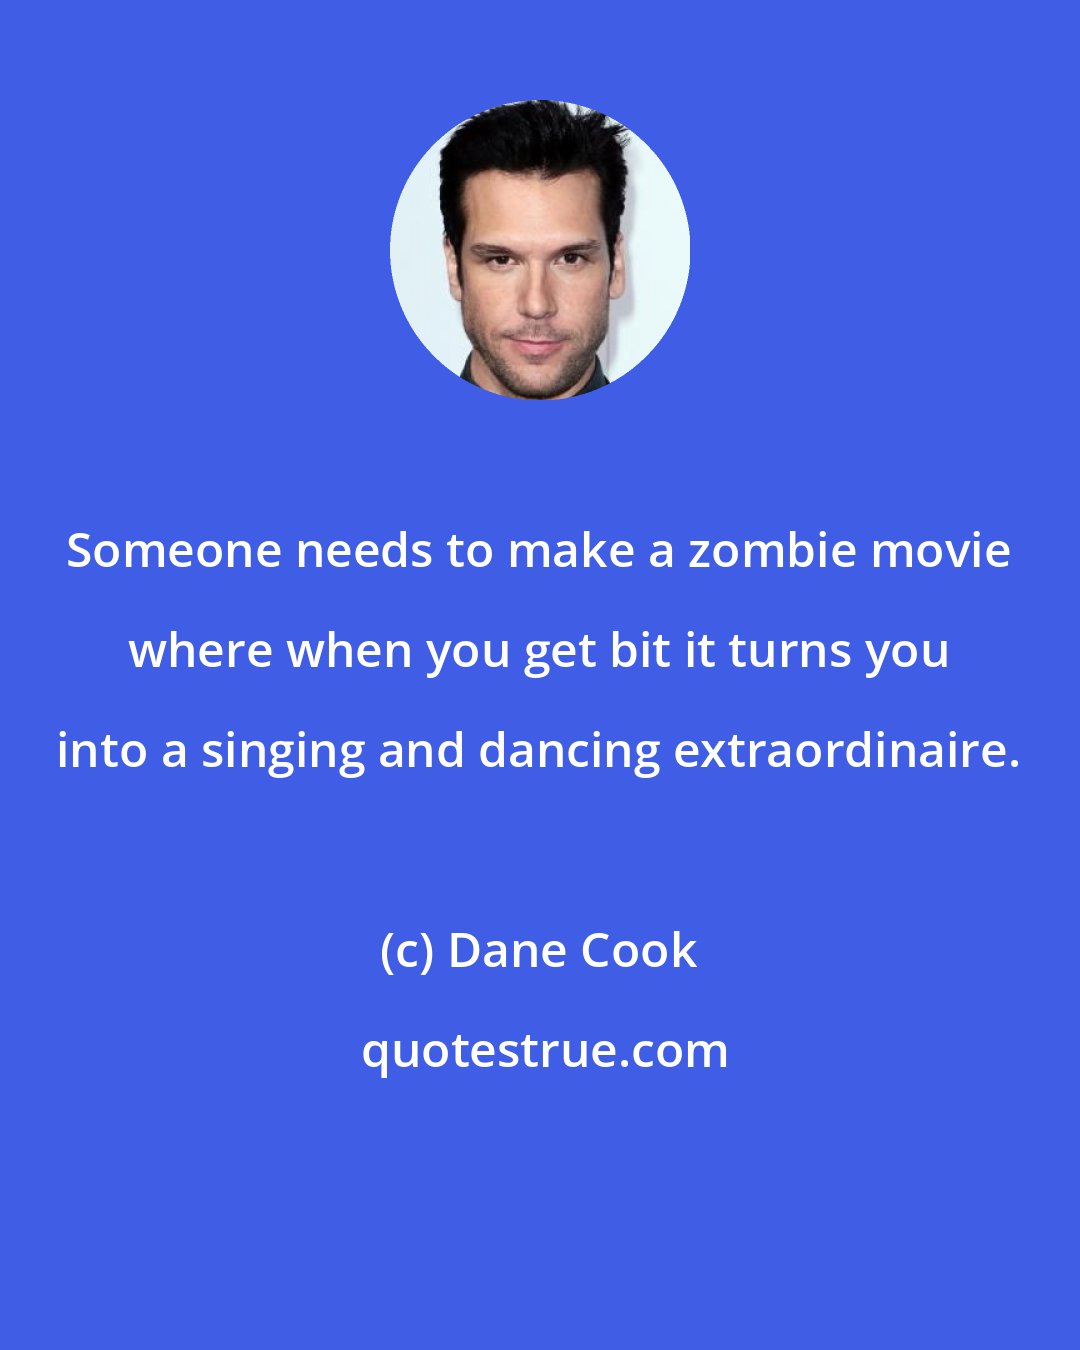 Dane Cook: Someone needs to make a zombie movie where when you get bit it turns you into a singing and dancing extraordinaire.